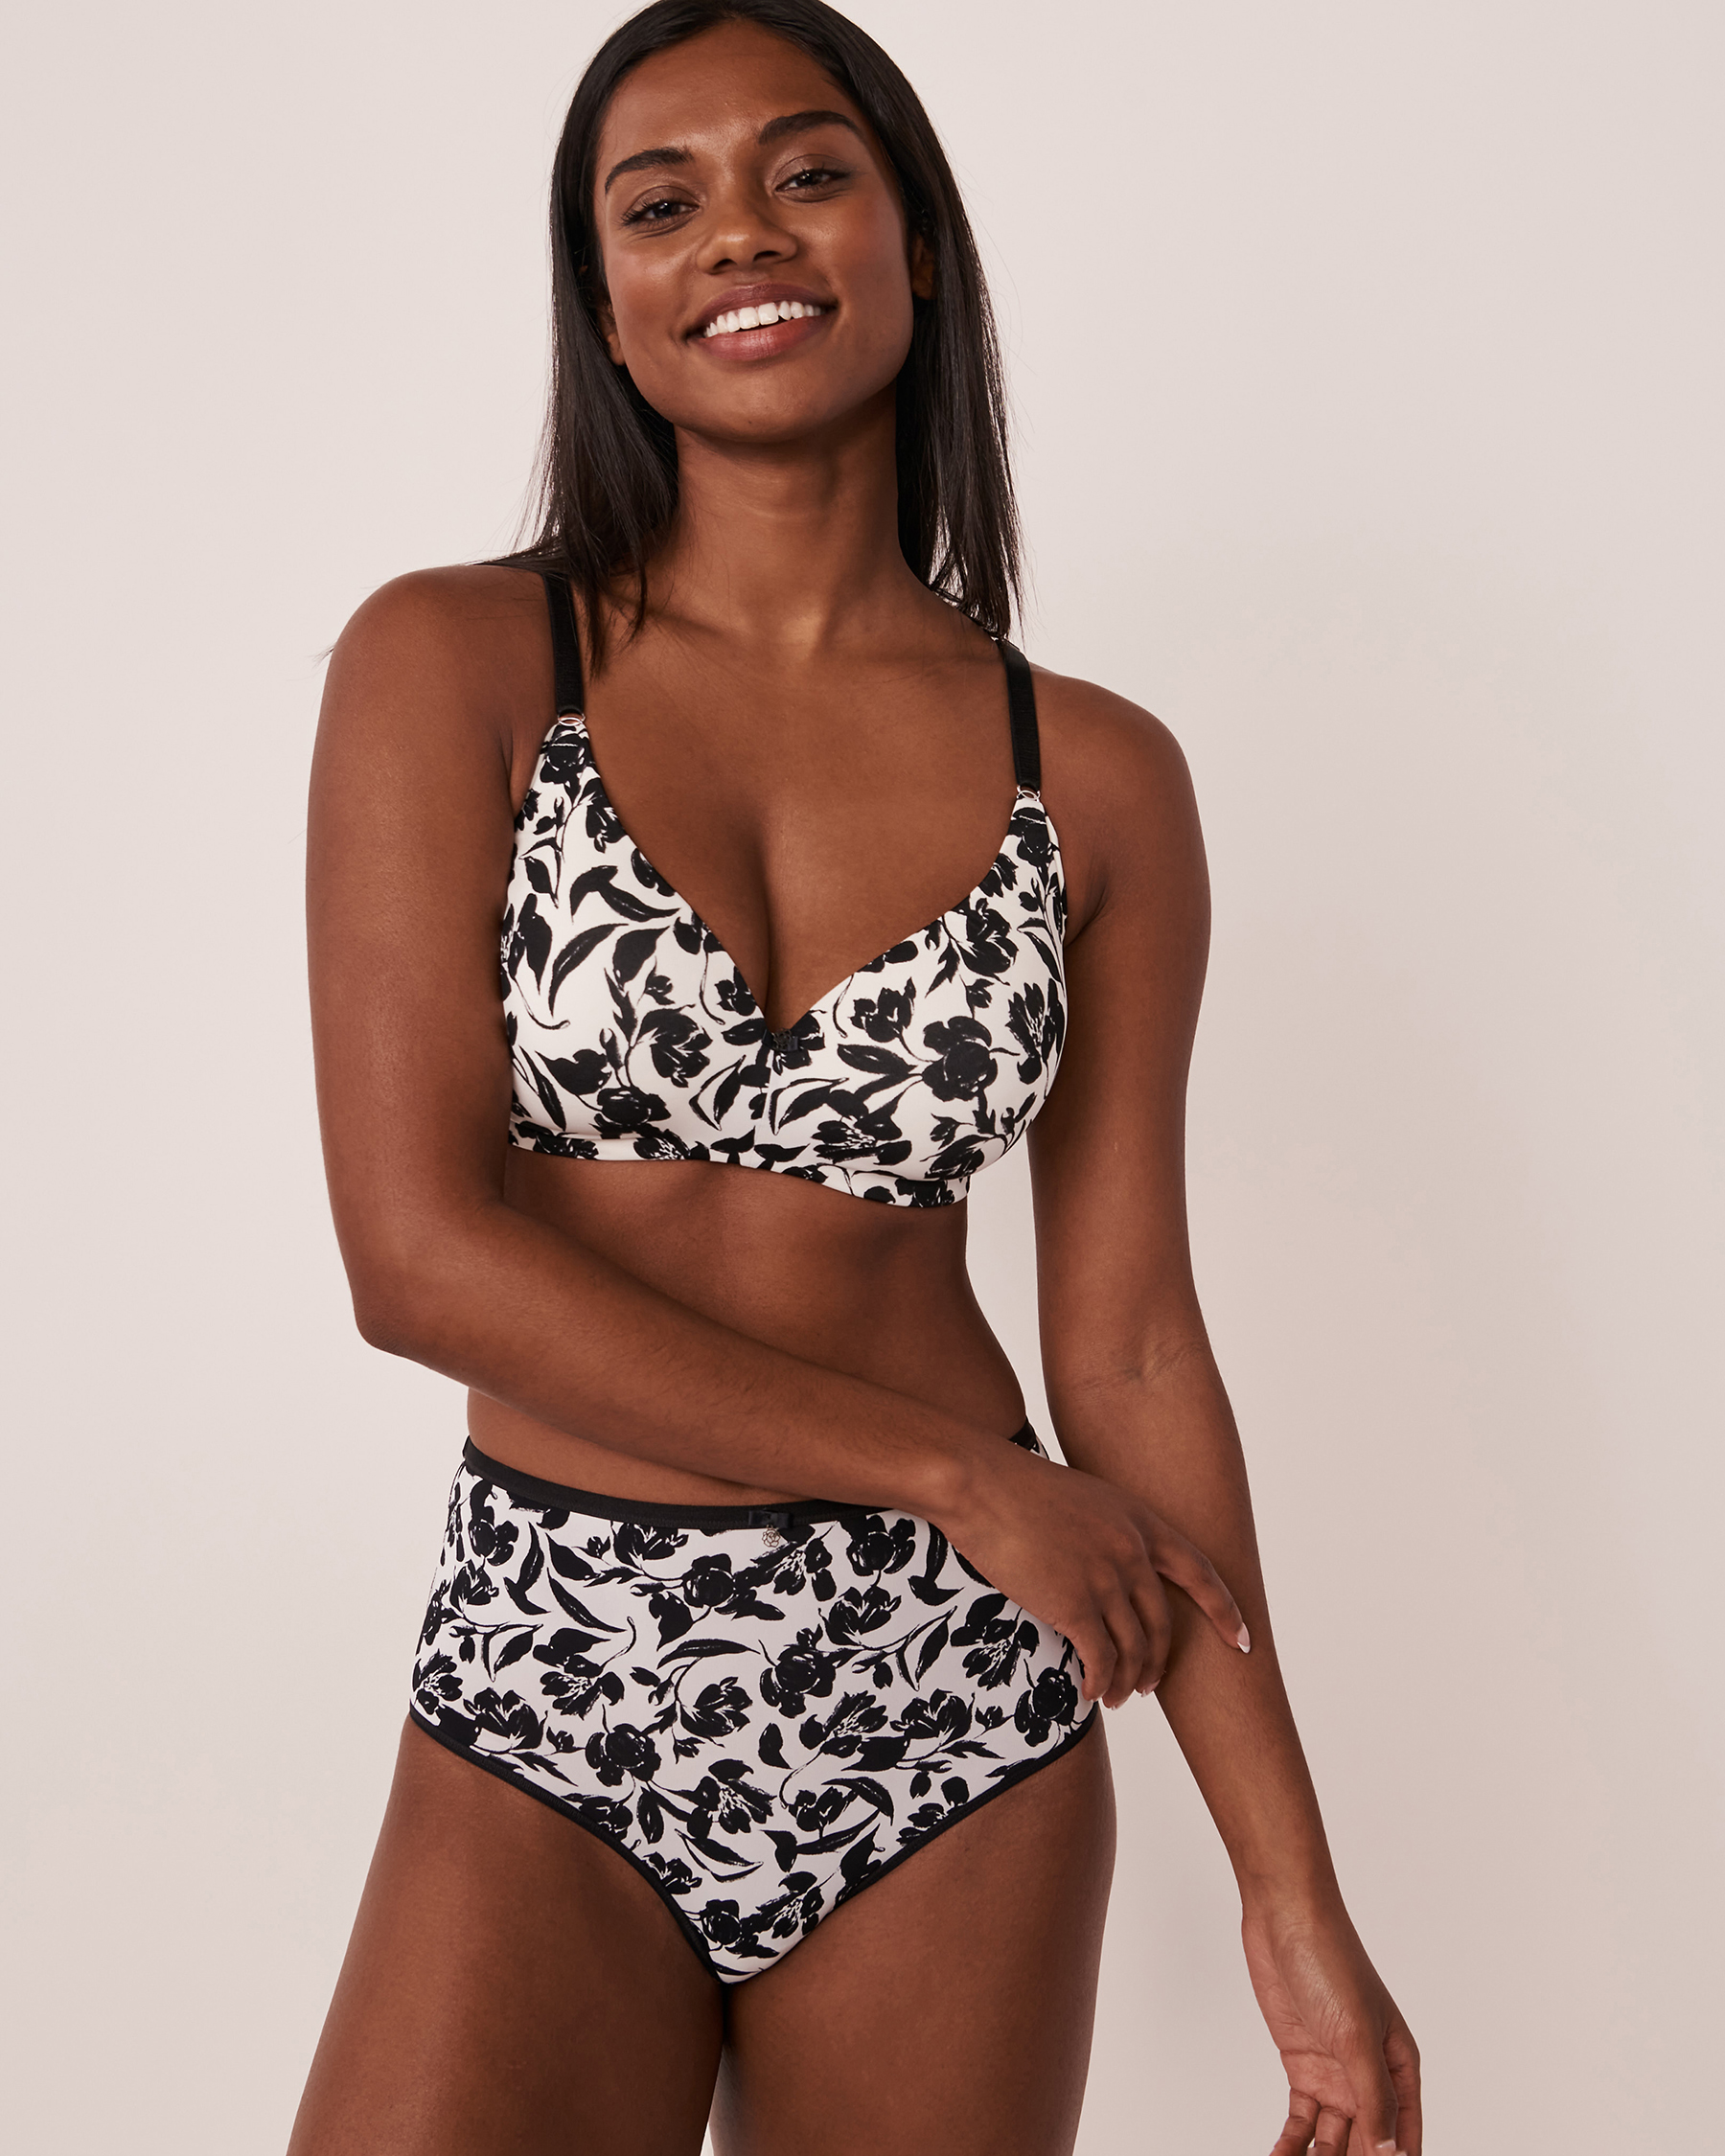 Lightly Lined Wireless Sleek Back Bra - Black and white floral